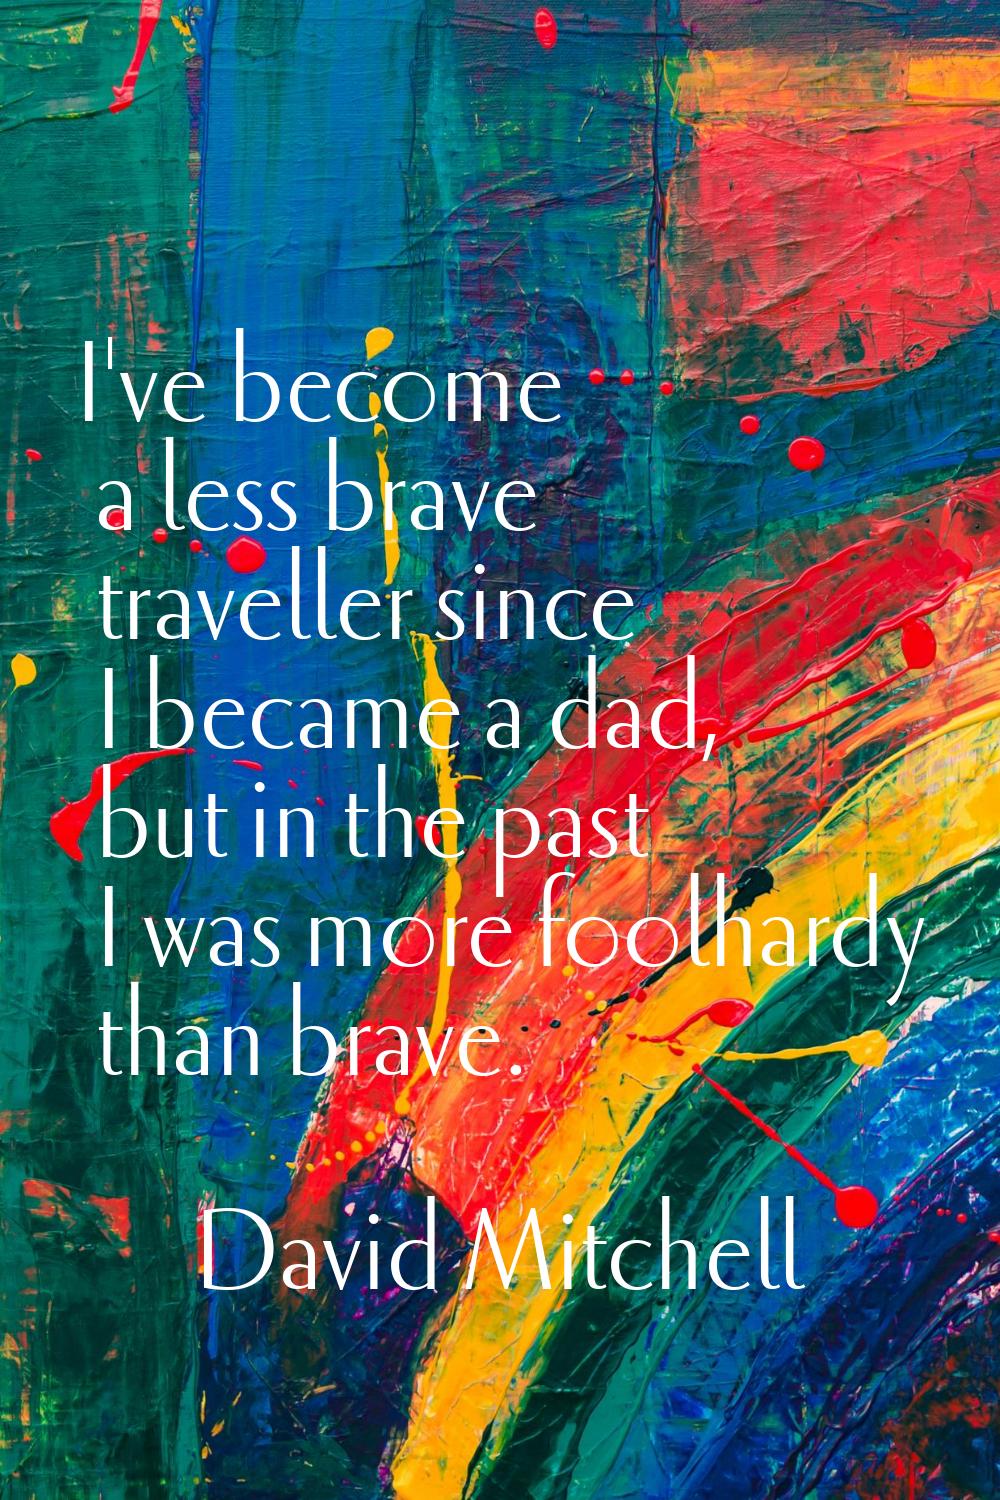 I've become a less brave traveller since I became a dad, but in the past I was more foolhardy than 